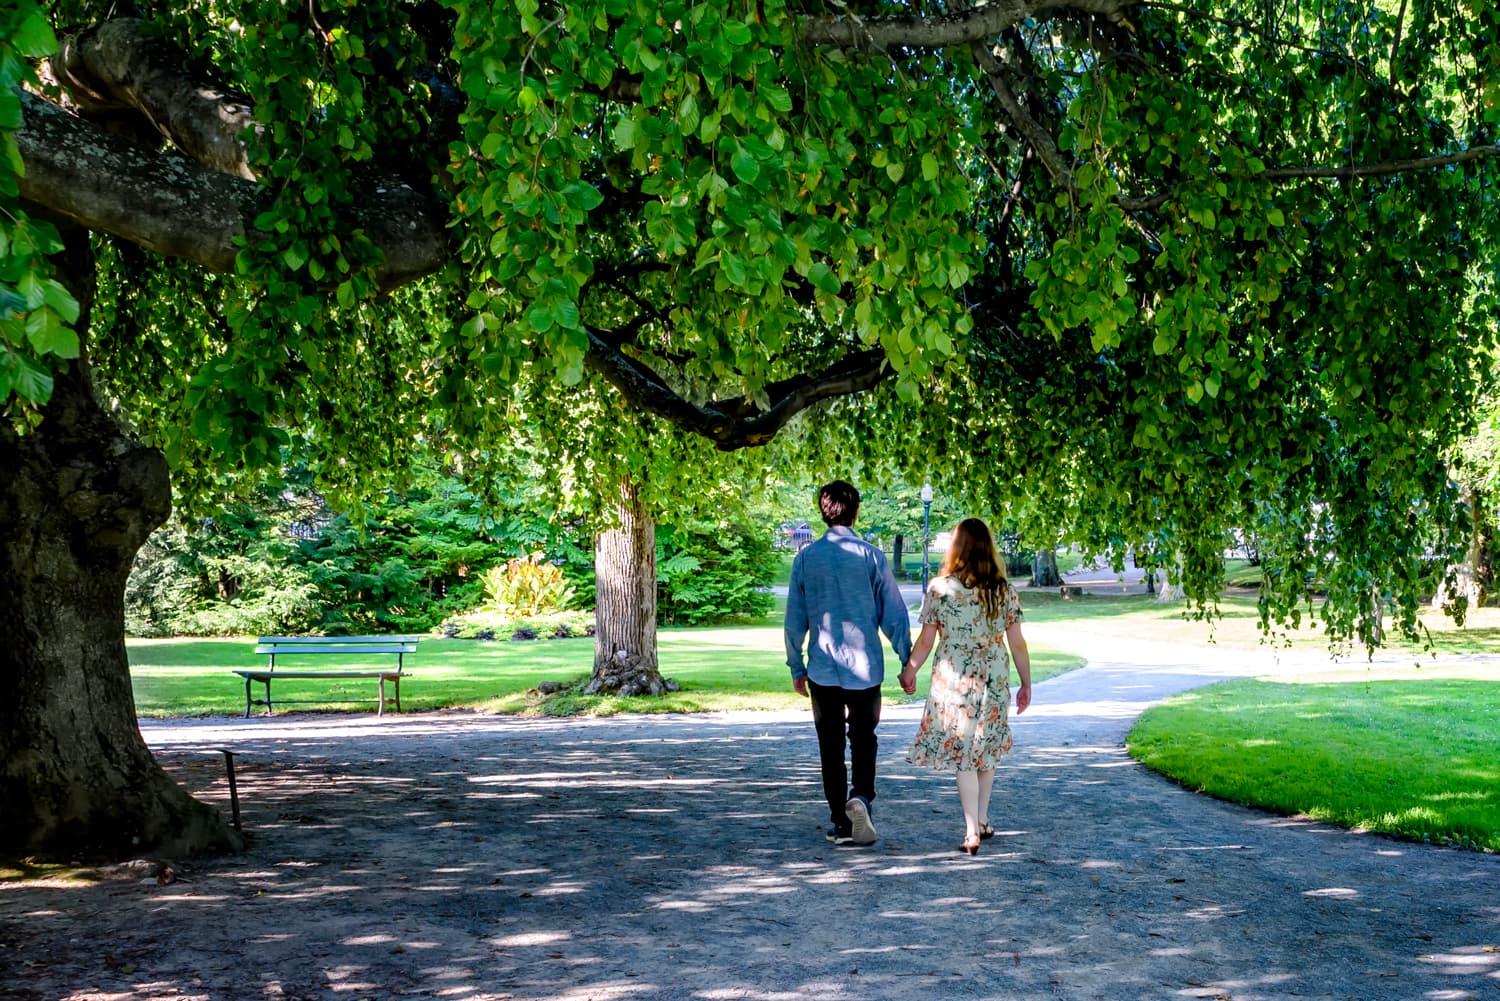 A newly engaged couple walks down a pathways at the Public Gardens in Halifax, NS under the tree canopy.